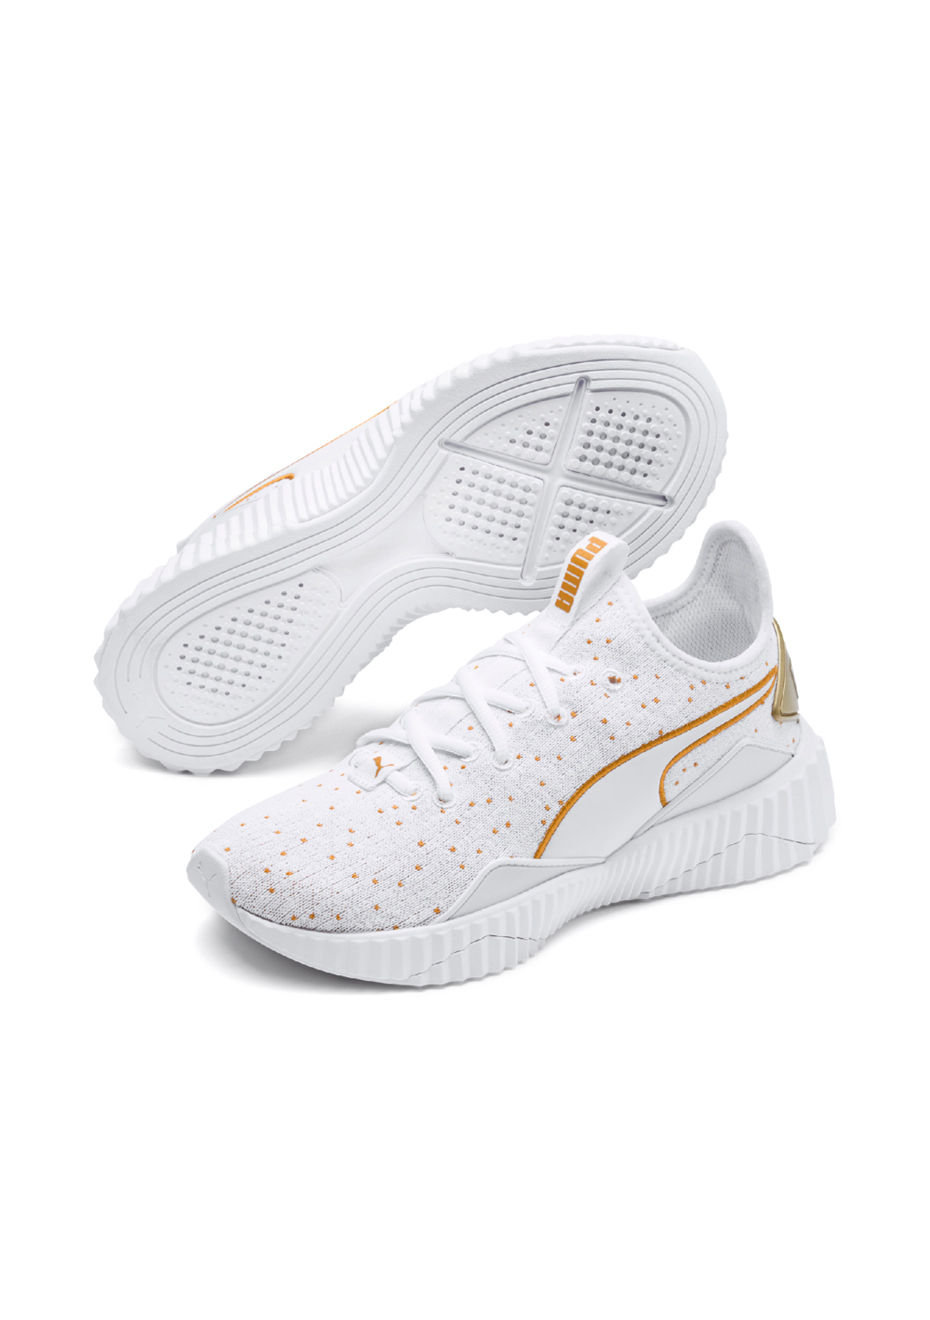 puma white and gold shoes